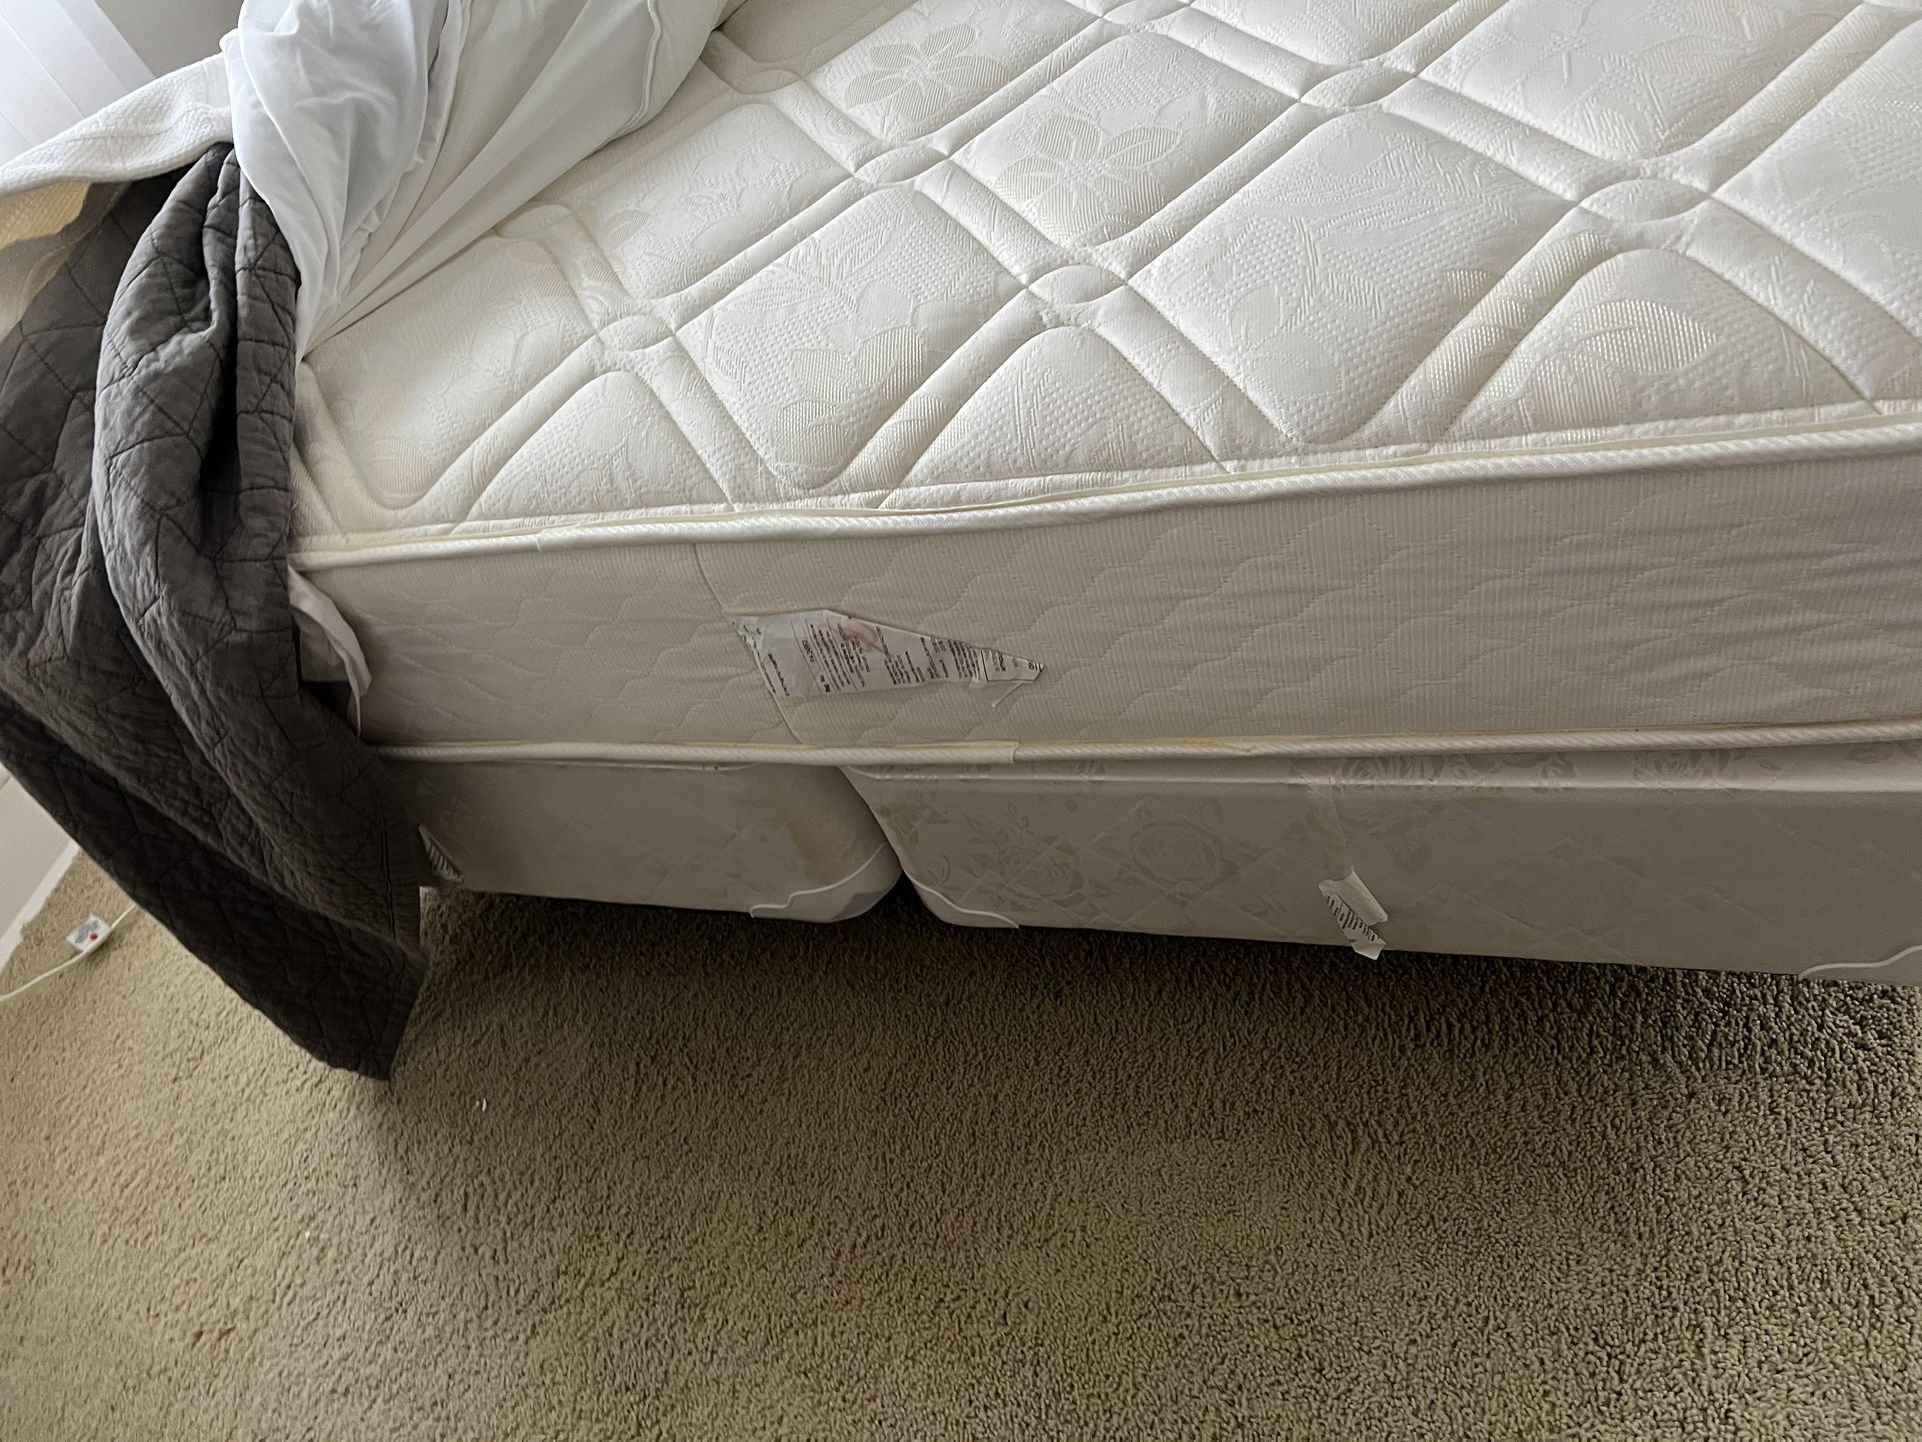 Queen Bed With Mattress And Split Box Springs 